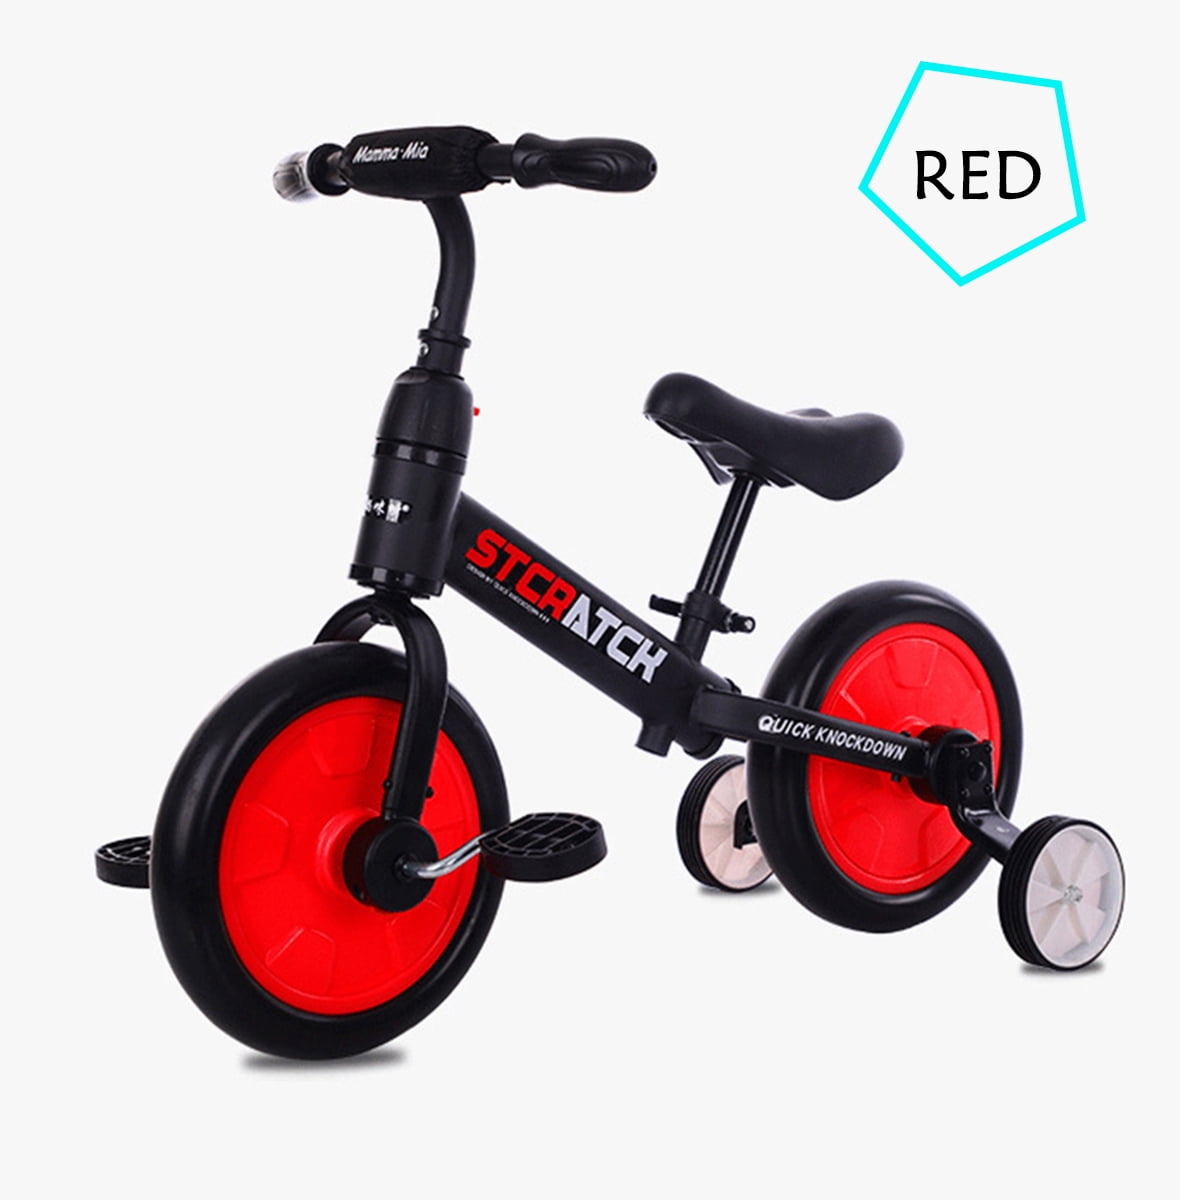 12'' Balance Bike Detachable Footless Scooter Baby Bike Suitable For 1-6 Years Old Kids and Toddlers